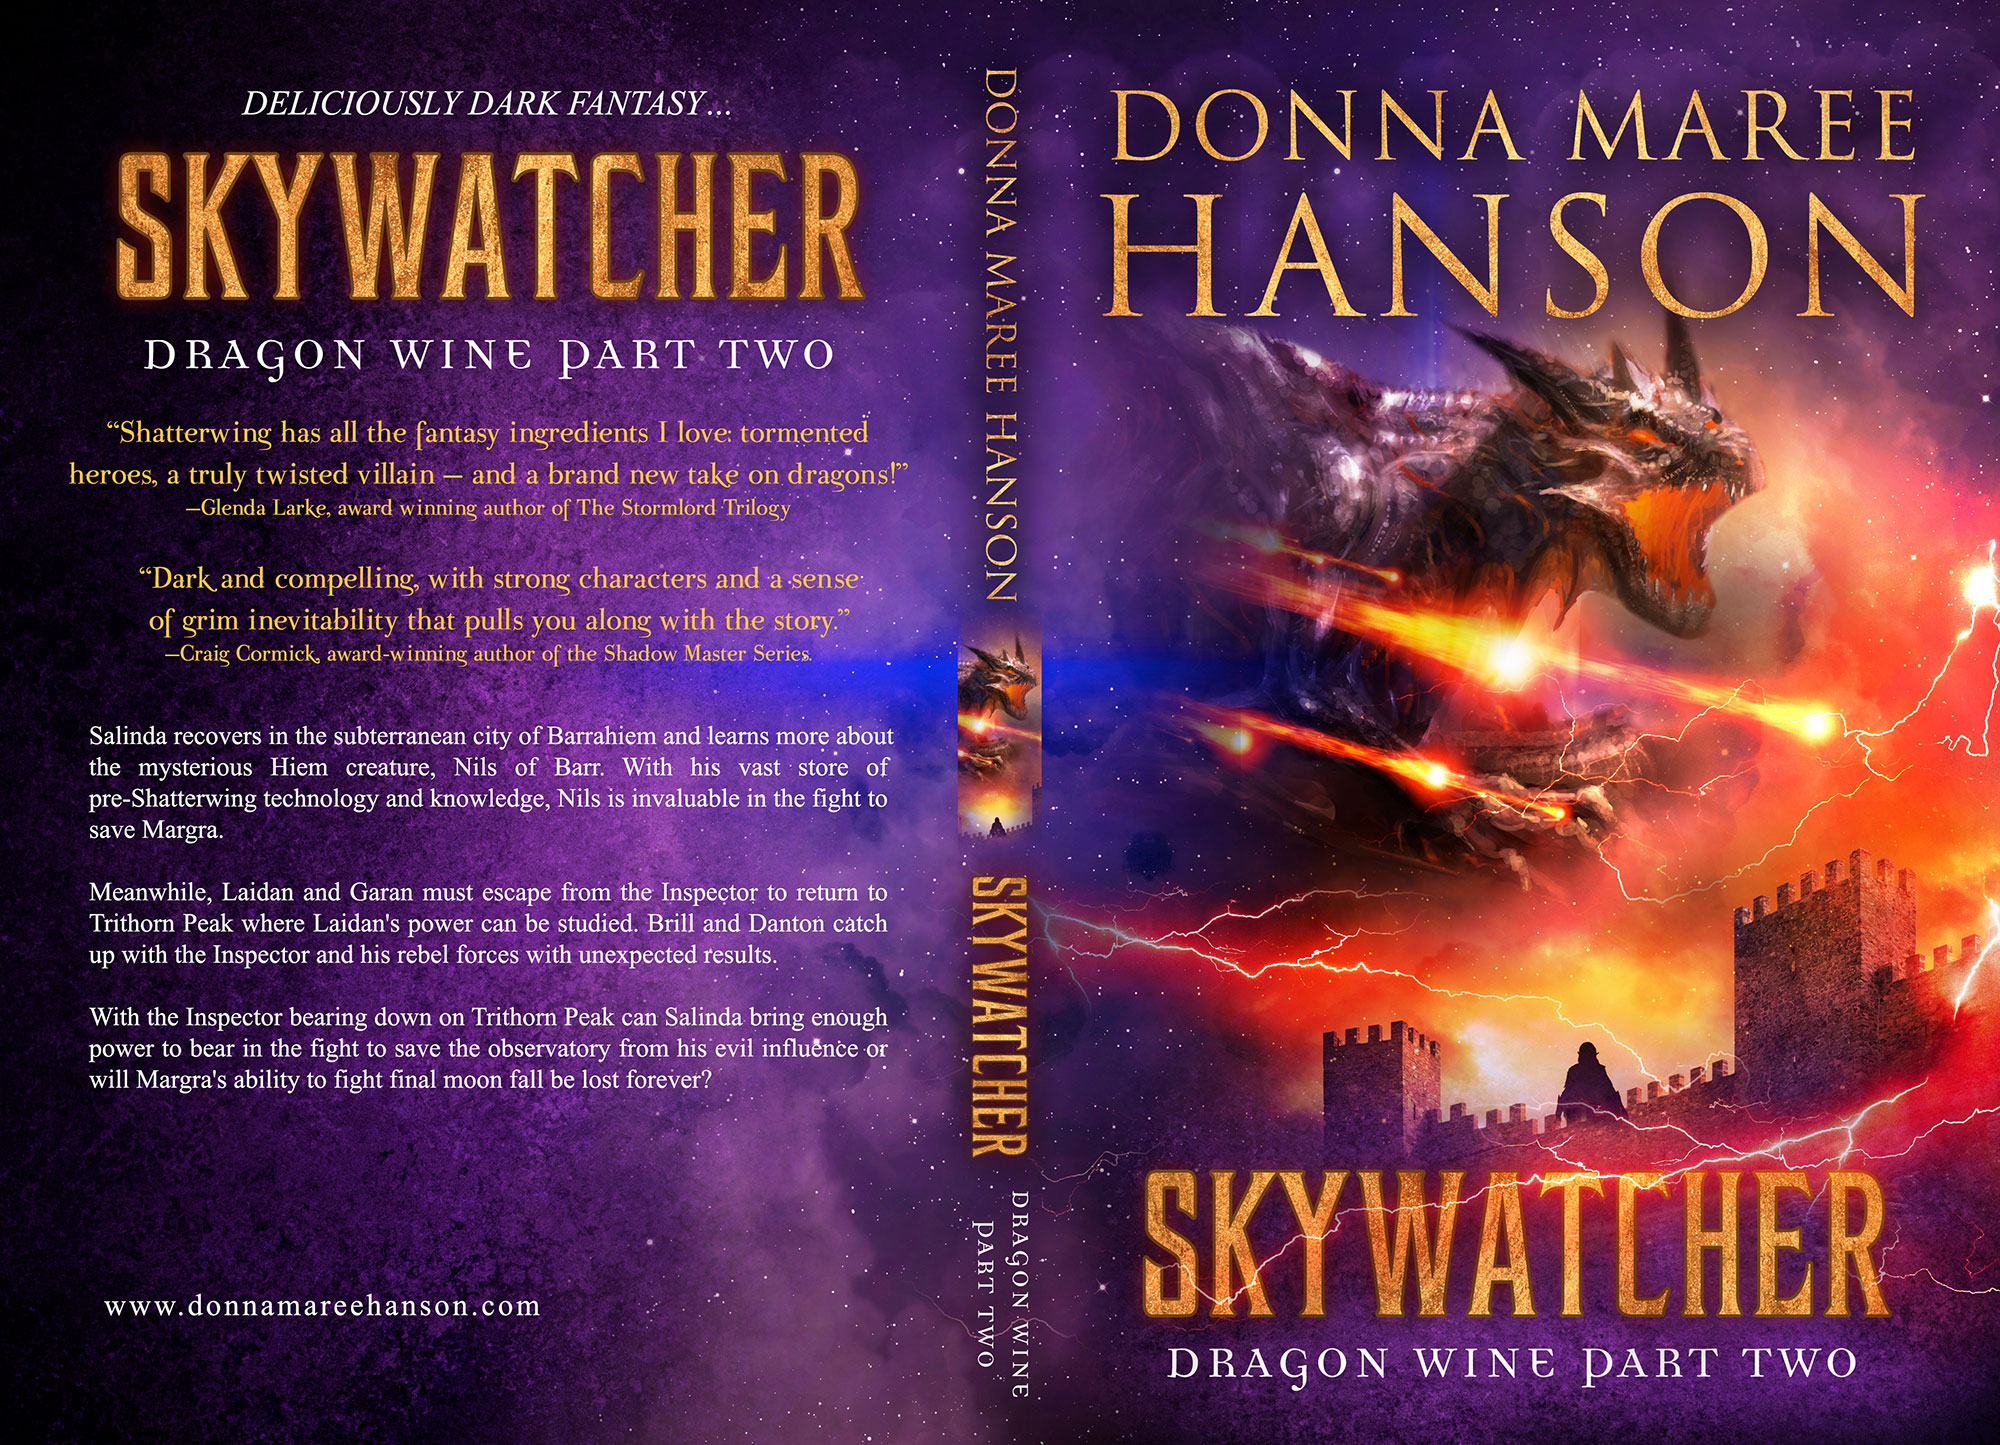 Skywatcher by Donna Maree Hanson (Print Coverflat)